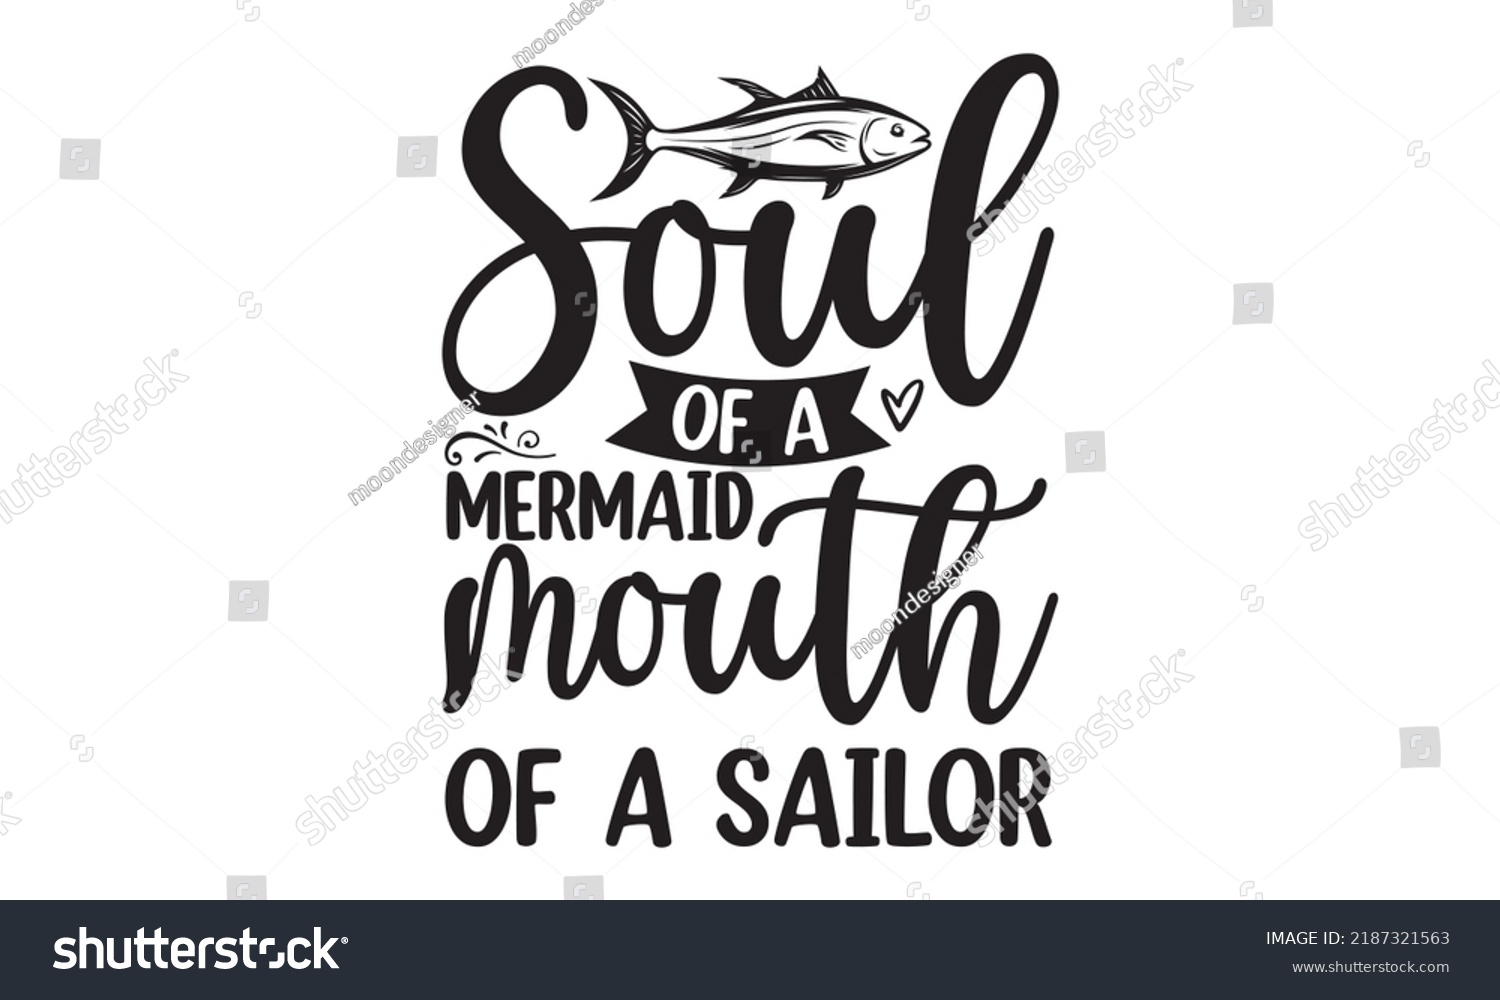 SVG of Soul of a mermaid mouth of a sailor- Fishing t shirt design, svg eps Files for Cutting, Handmade calligraphy vector illustration, Hand written vector sign, svg, vector eps 10 svg